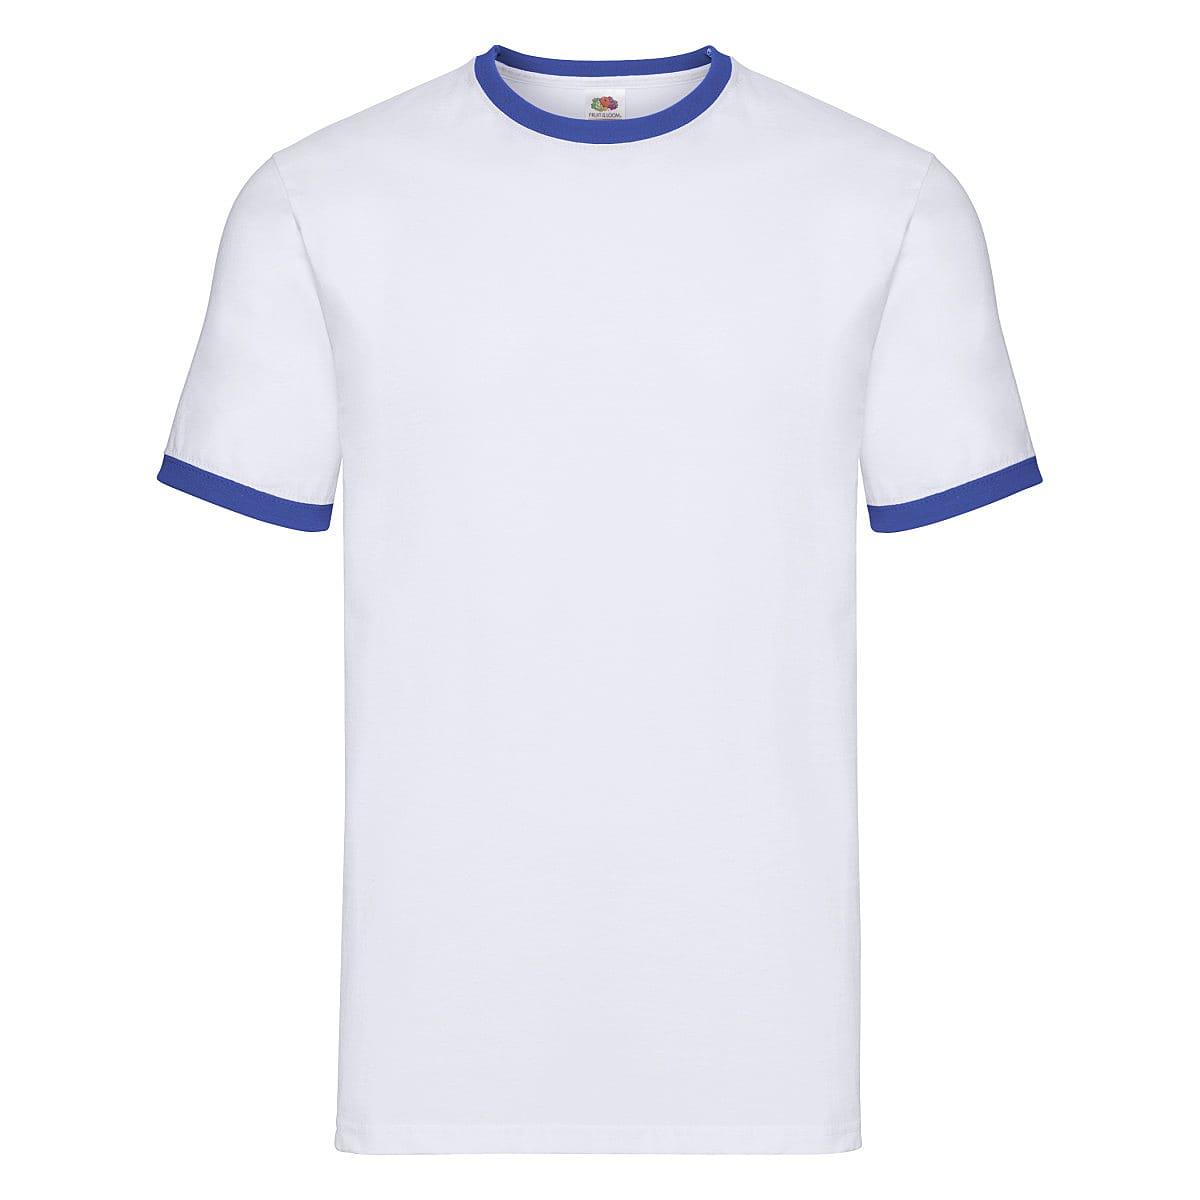 Fruit Of The Loom Ringer T-Shirt in White / Royal Blue (Product Code: 61168)